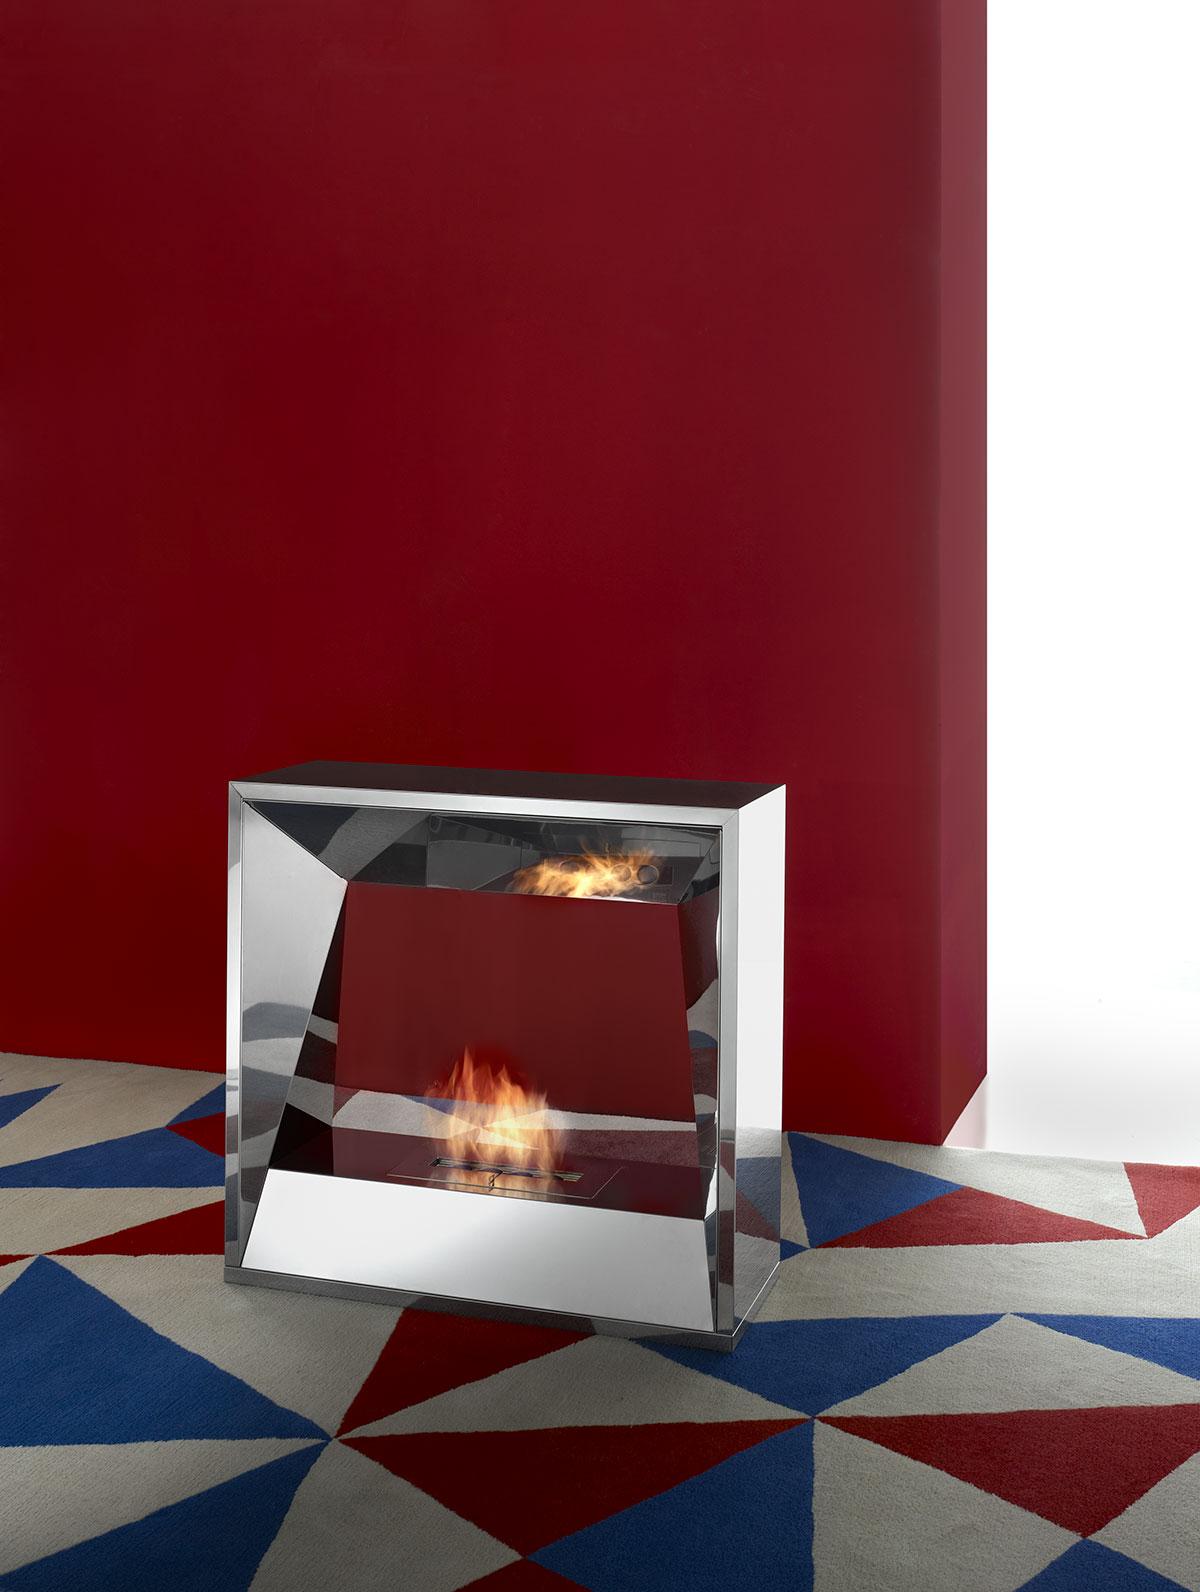 Our collection of luxury bio ethanol fireplace provides extreme ease of adoption to any environment. Discover our modern bio ethanol outdoor and indoor fireplaces.